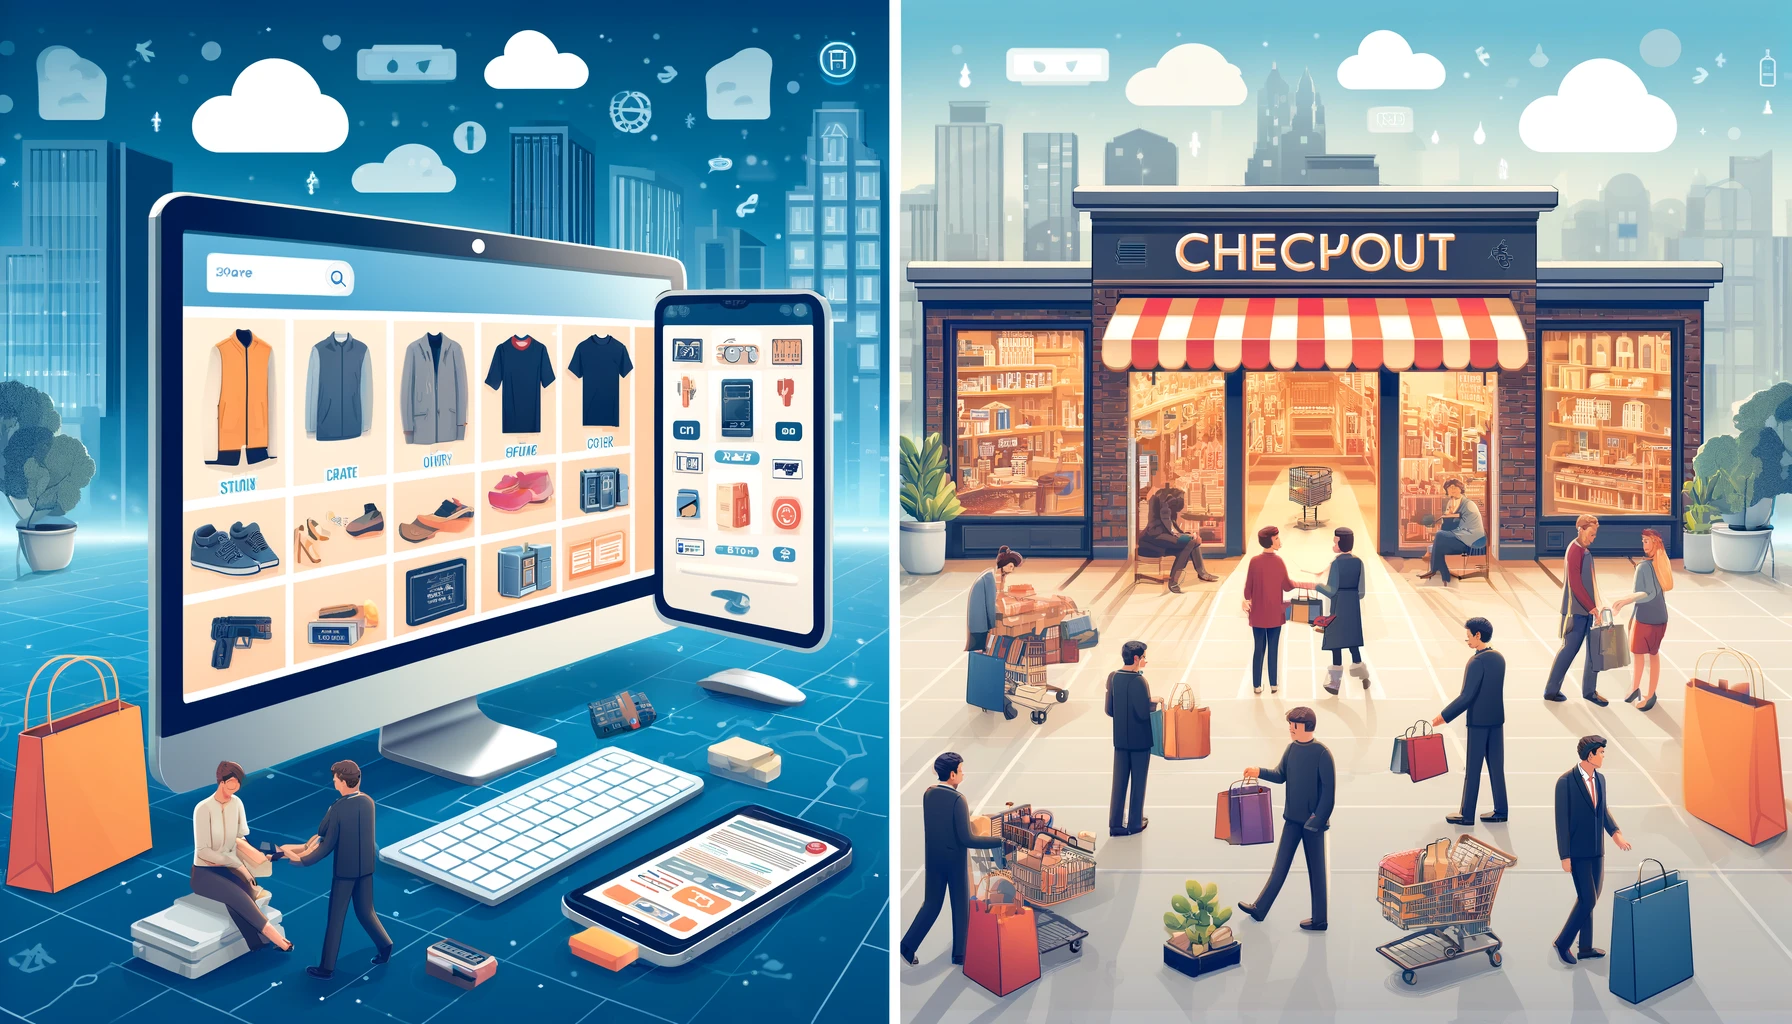 A split image comparing online shopping and in-store shopping. On the left, a digital marketplace is displayed on a computer and tablet screen, featuring various products like clothing, shoes, and accessories, set against a backdrop of digital icons and cityscape. On the right, a bustling physical store labeled "Checkout" with people shopping, pushing carts, and carrying bags, indicating a lively retail environment. The scene contrasts the convenience of e-commerce with the traditional in-store shopping experience.